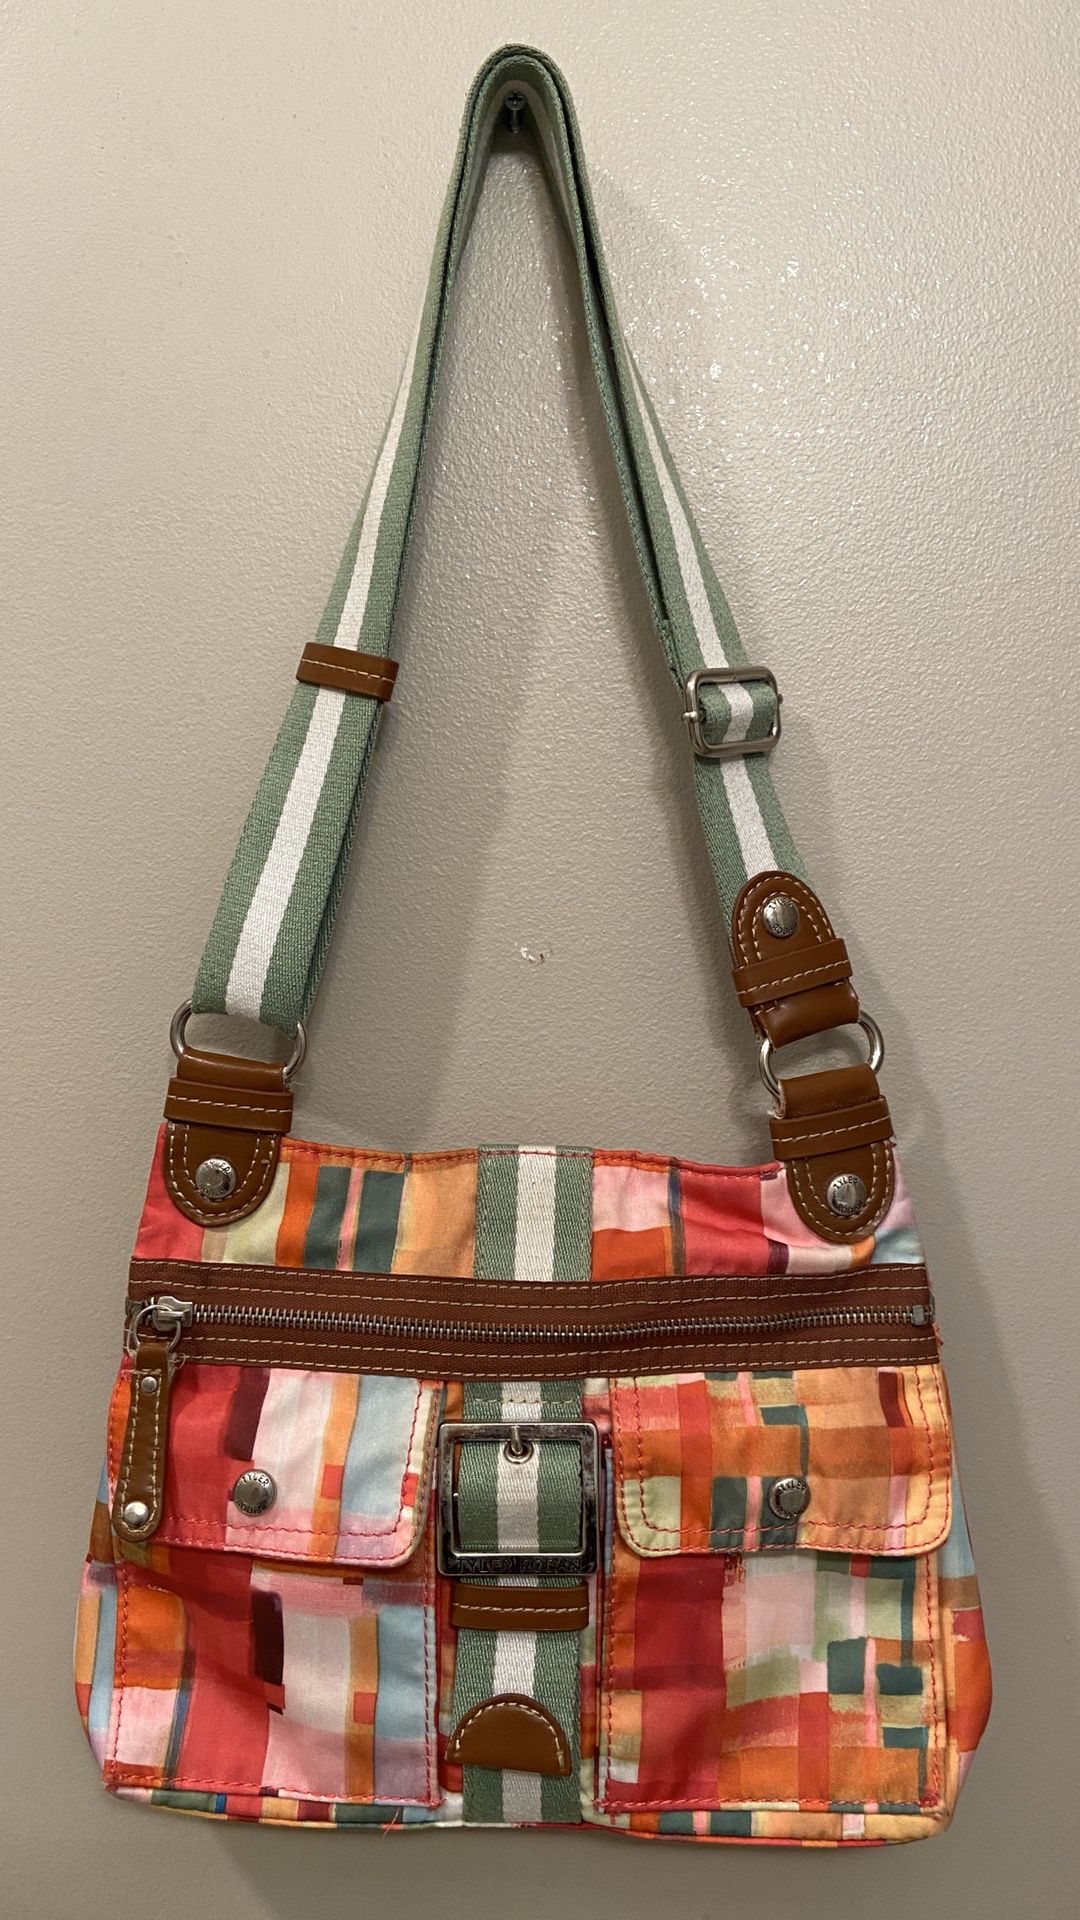 TOMMY HILFIGER BAG (GREAT CONDITION!)